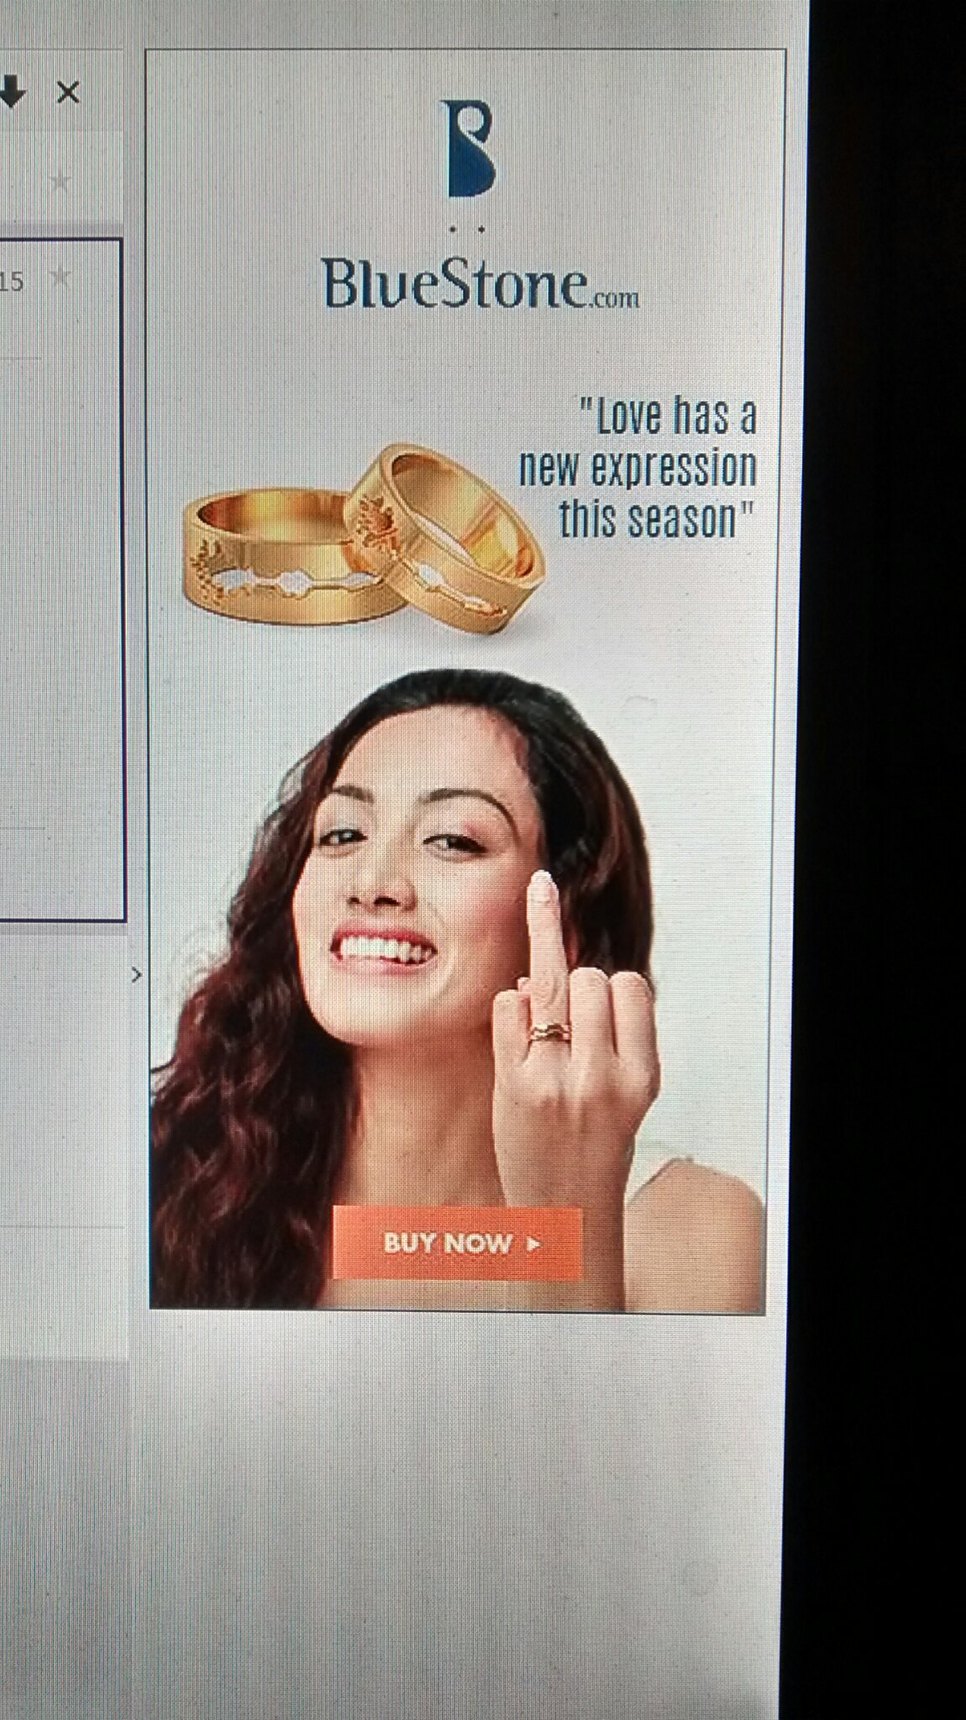 This add got my attention - meme